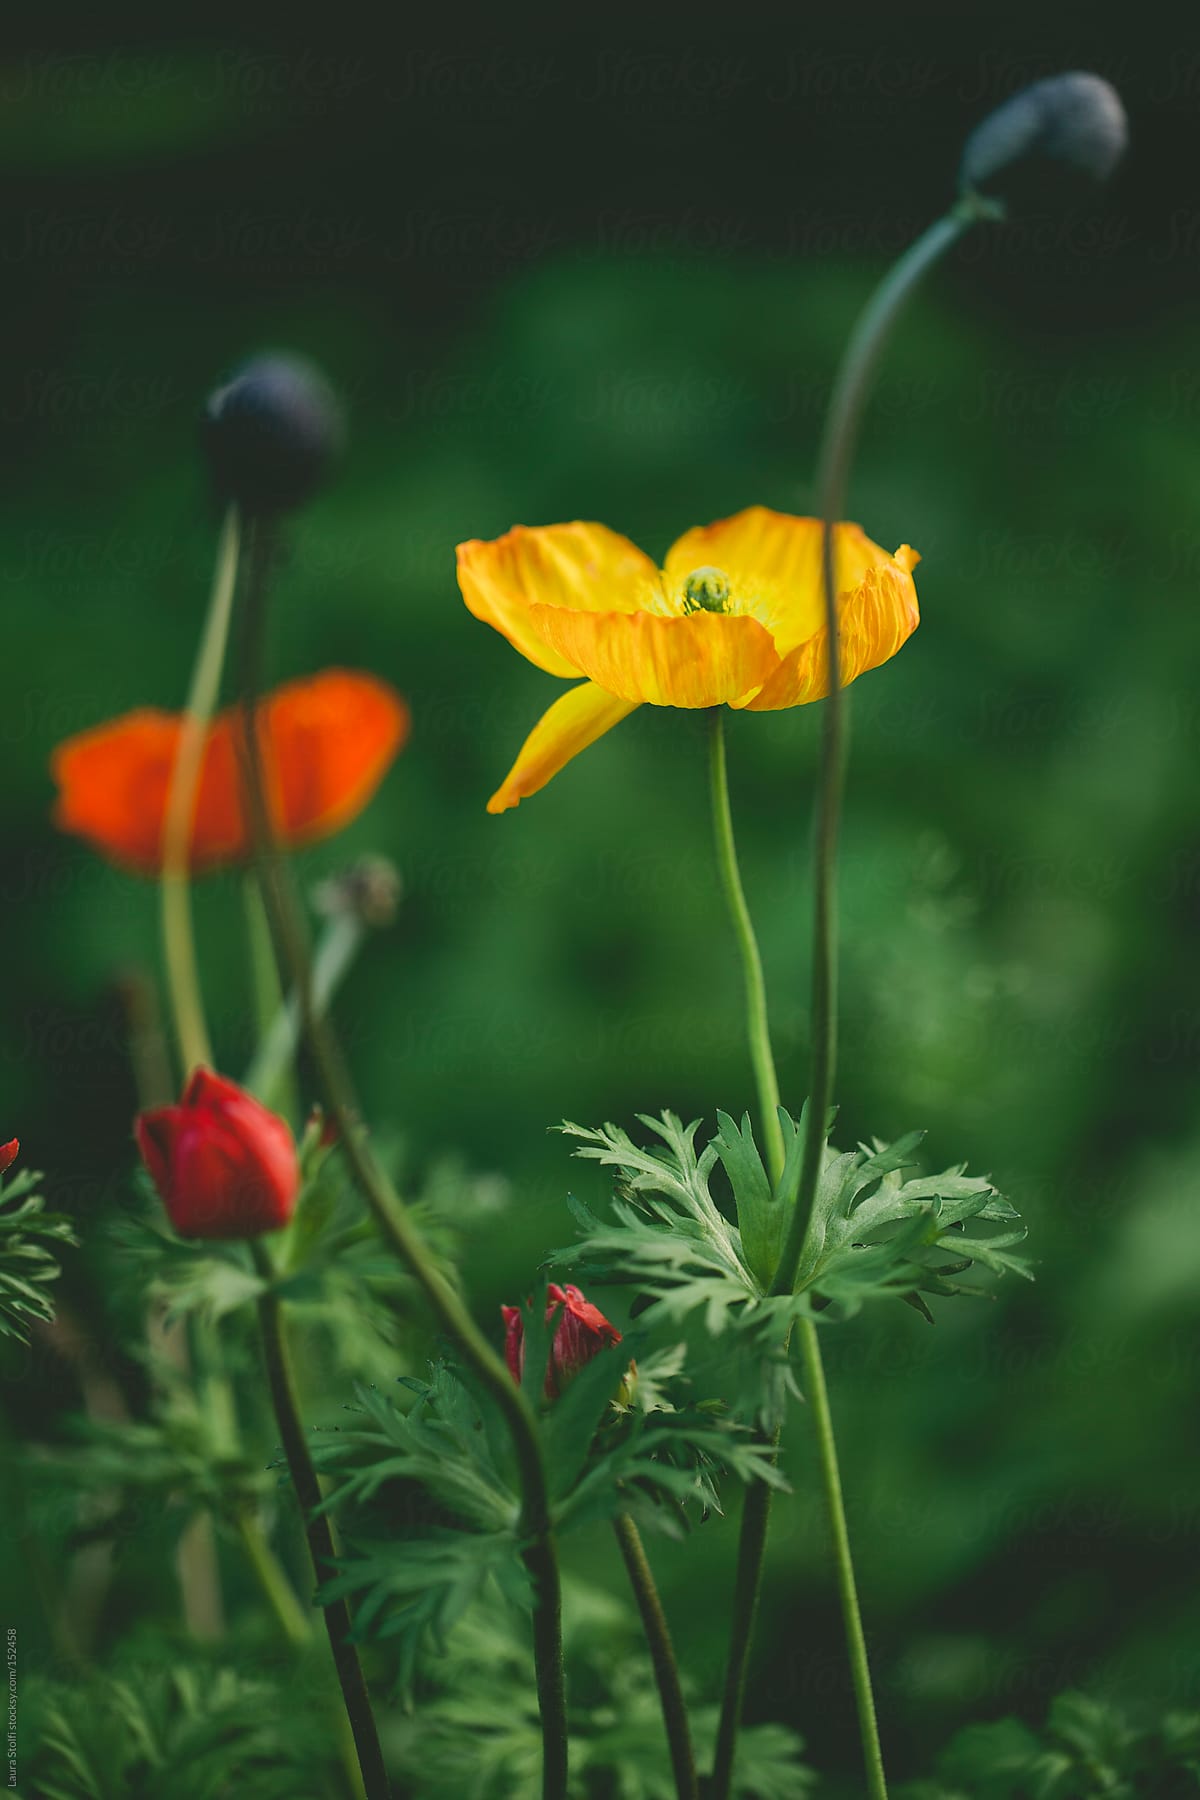 Flowered lawn: close up of poppies flowers and seeds and buds